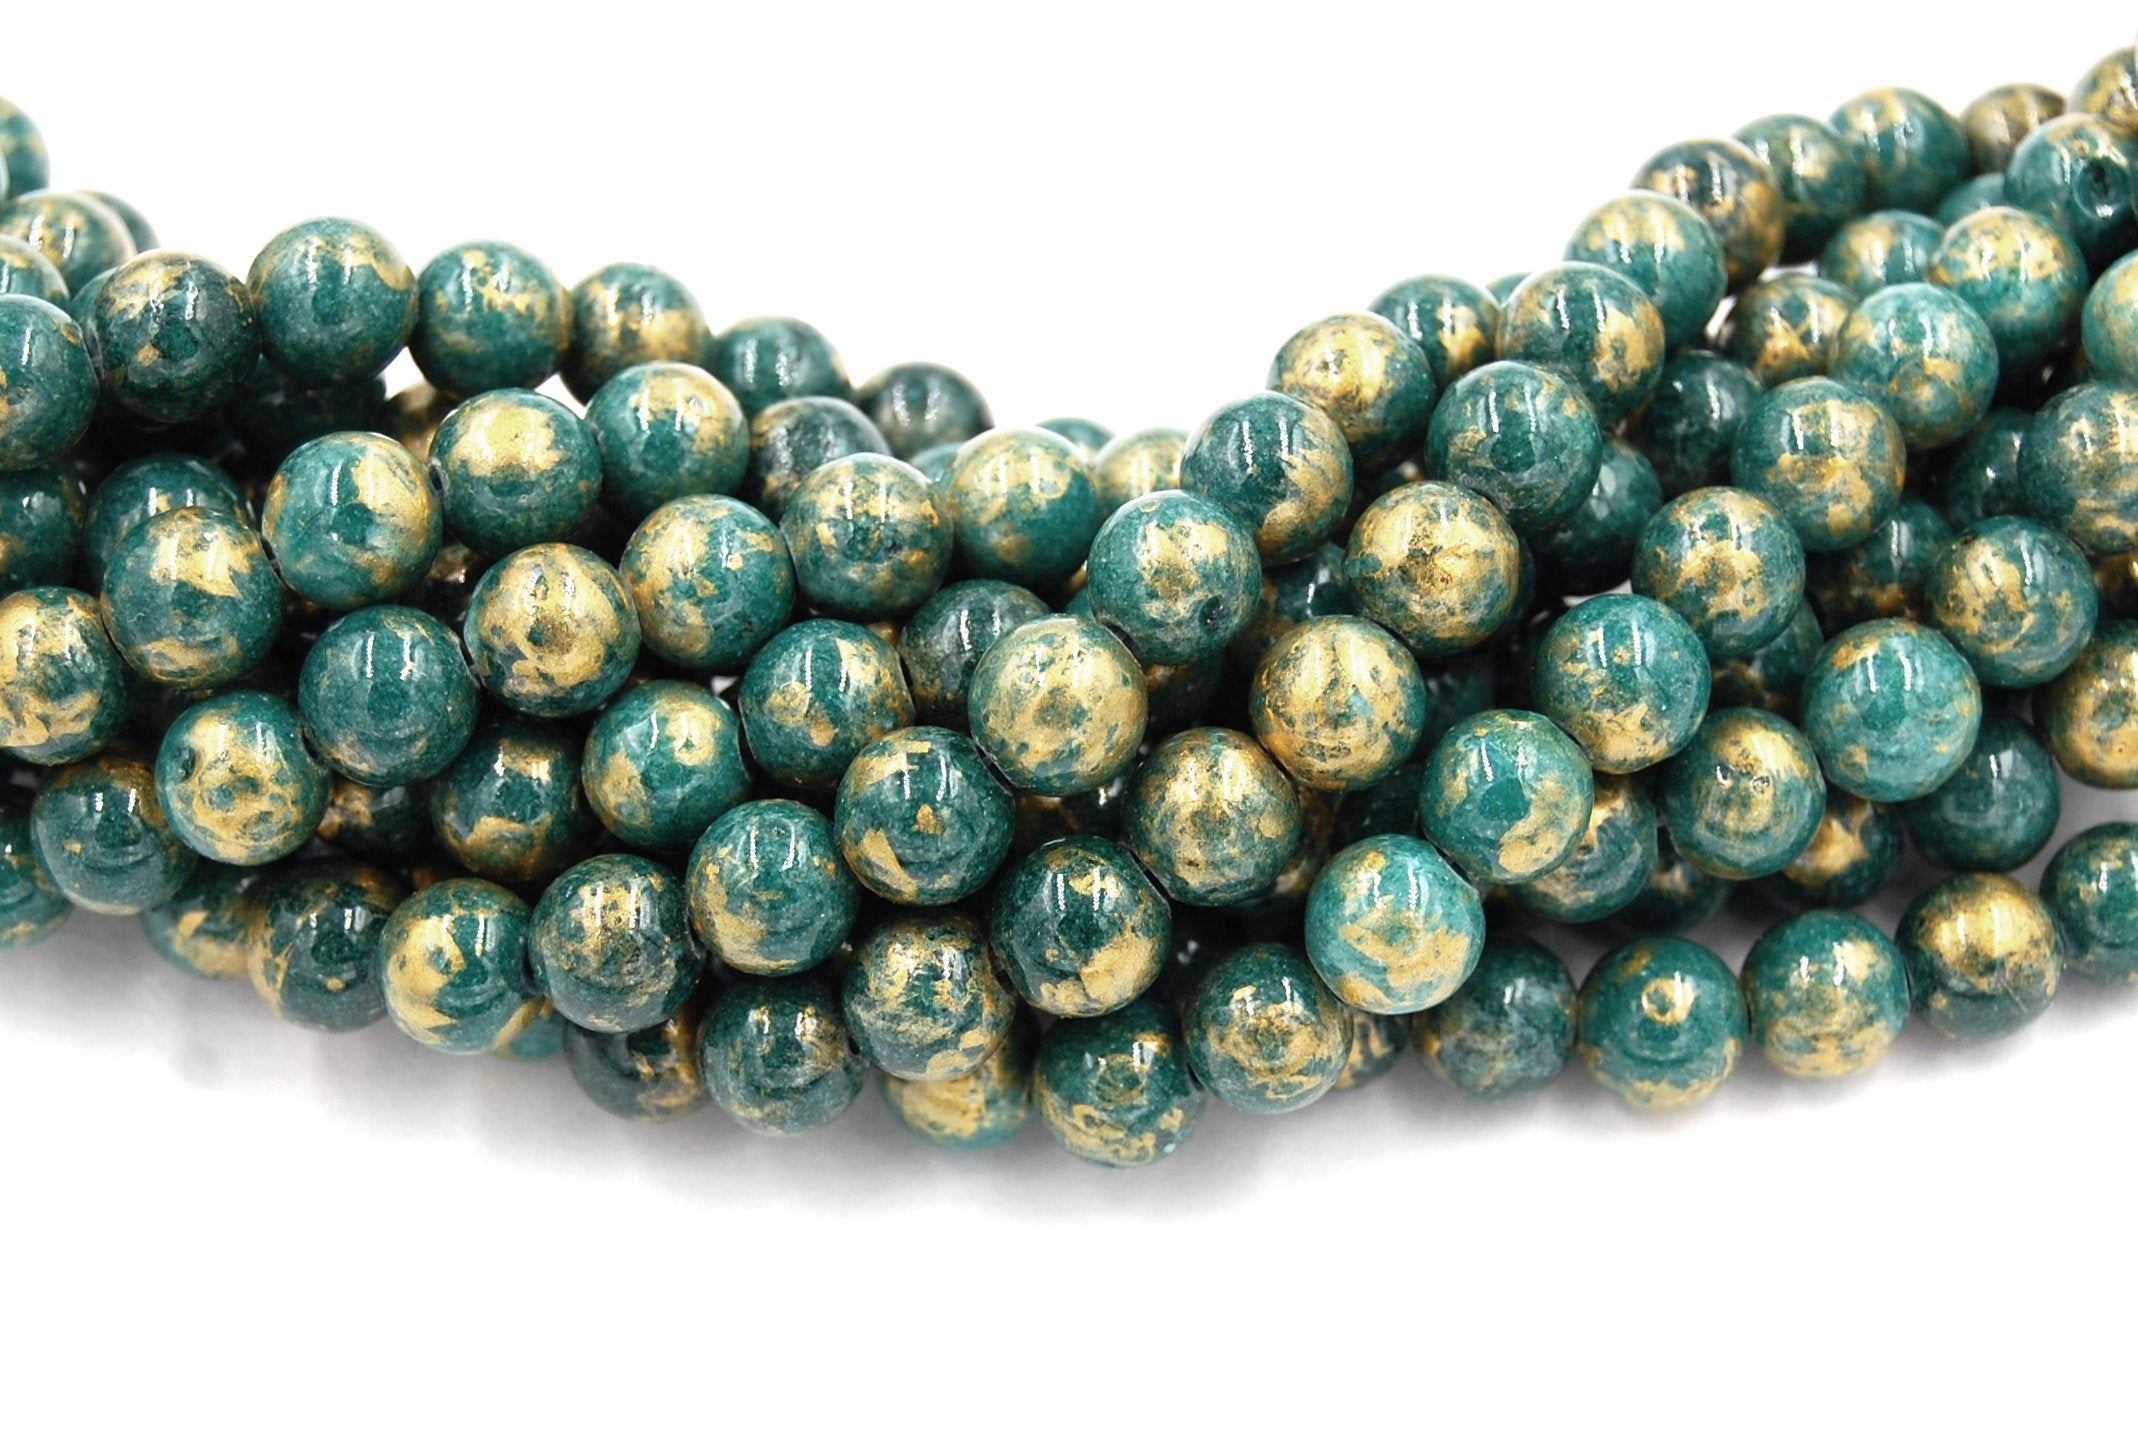 Antique Emerald Green Gold Dust Jade 4mm, 6mm, 8mm, 10mm, 12mm Round Beads -15 inch strand